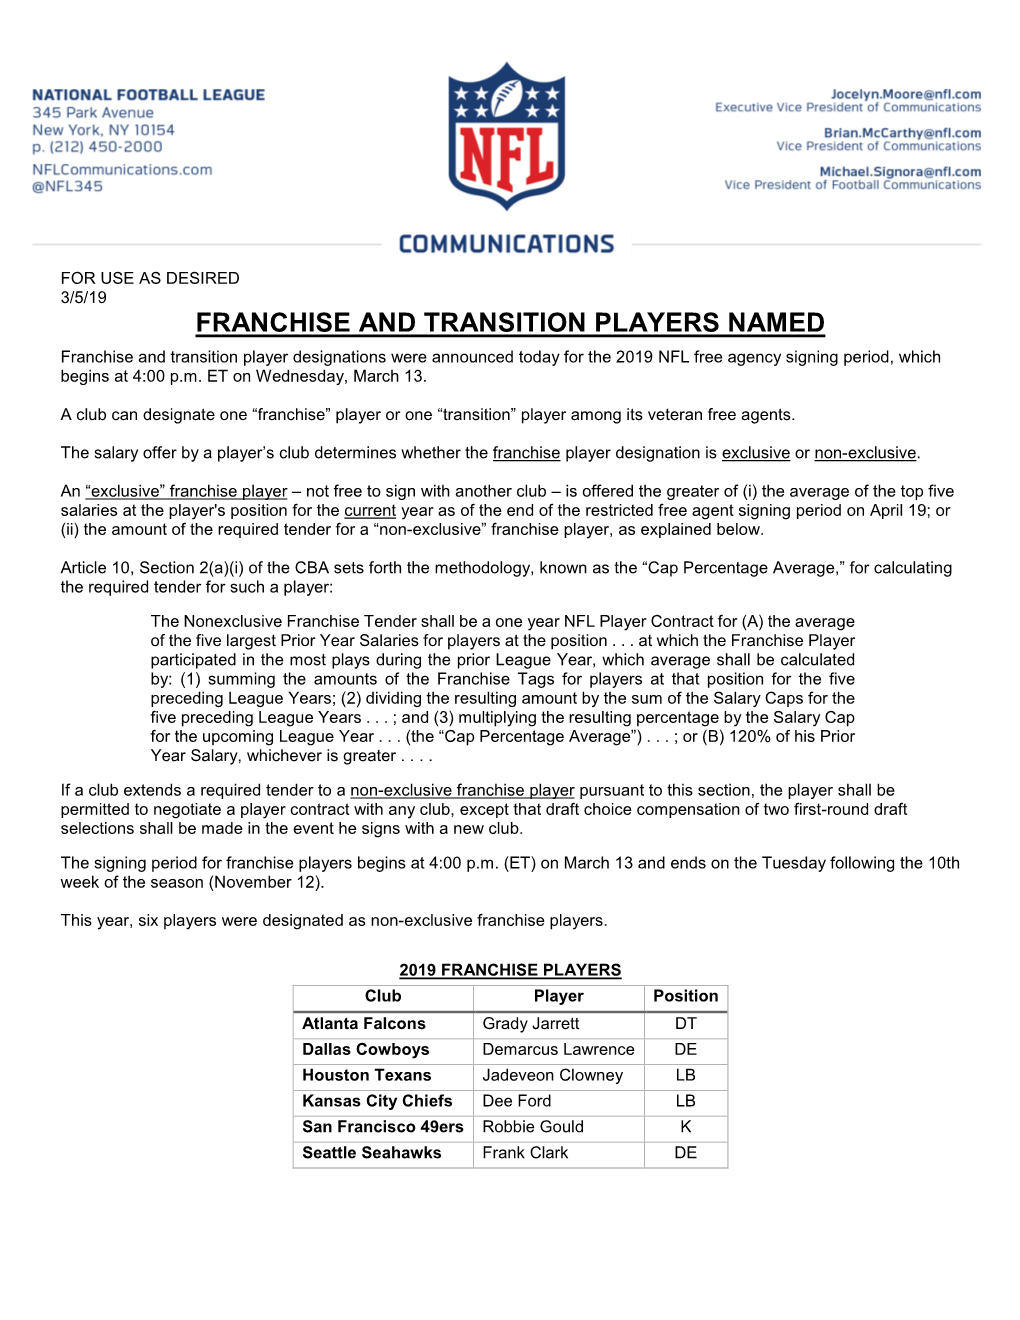 Franchise Transition Players